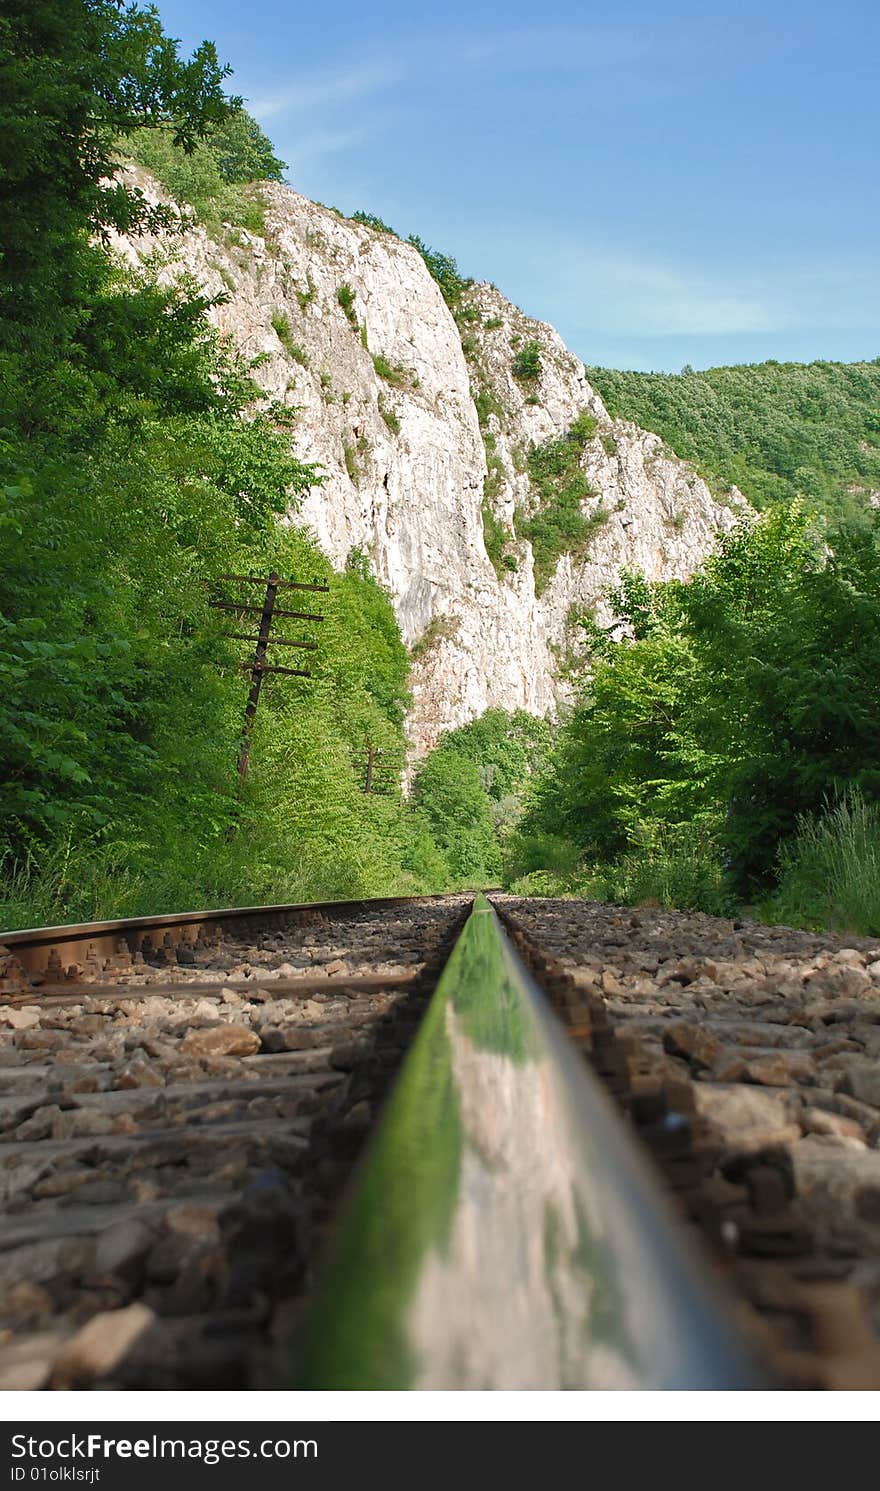 Landscape with  railway in the mountains- mountain and sky reflected in the  railway track